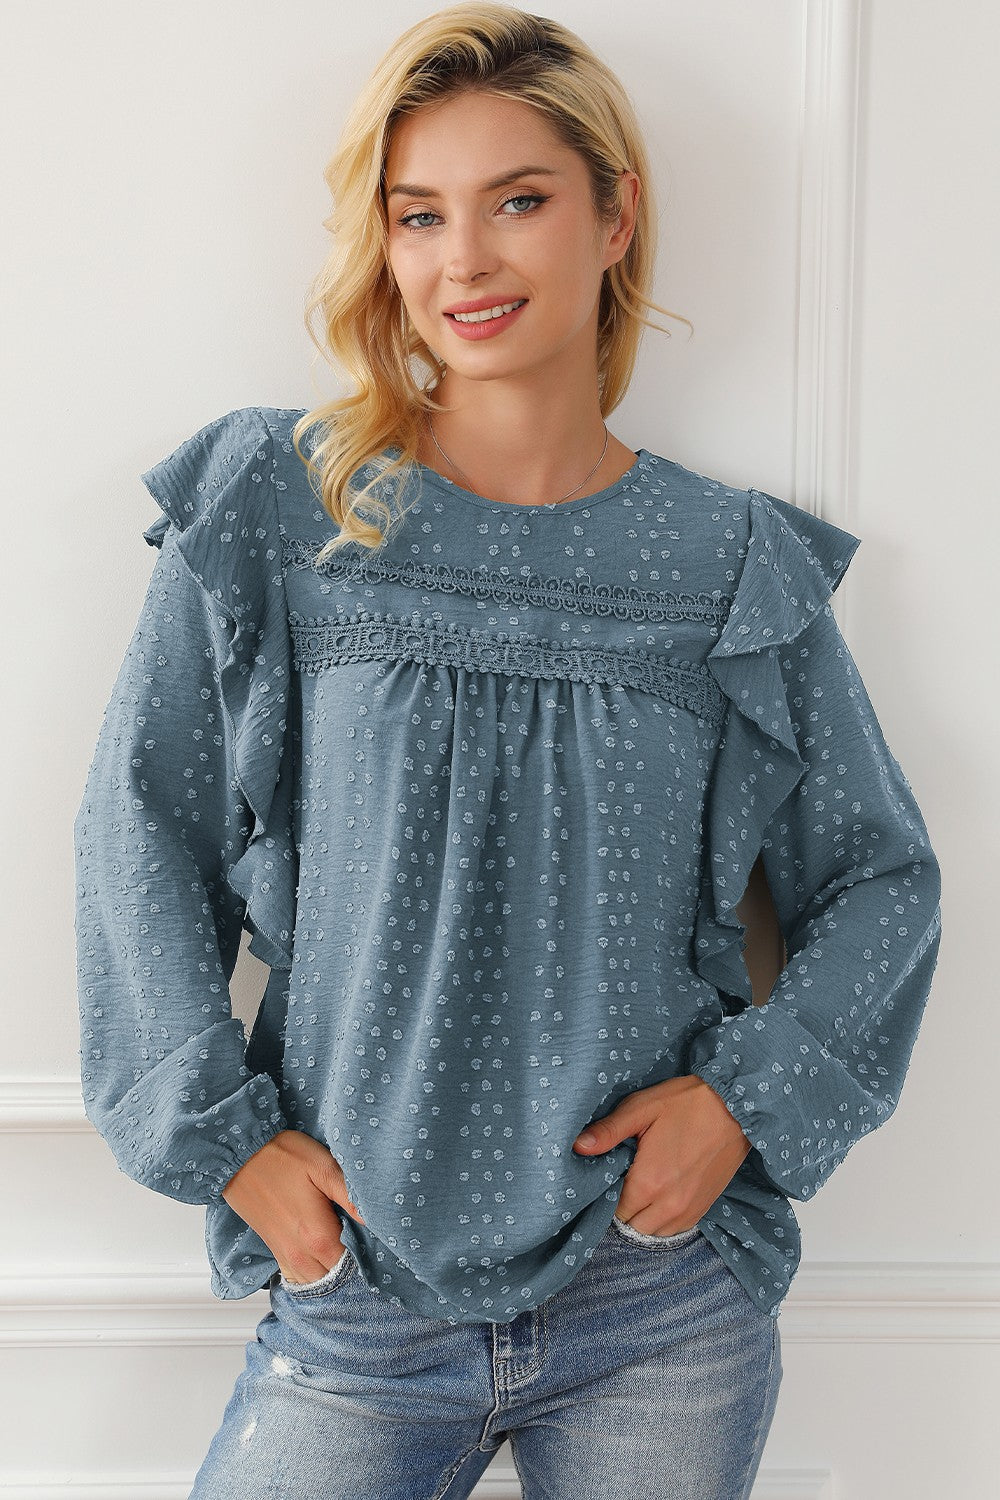 Round Neck Ruffled Blouse (2 Colors)  Krazy Heart Designs Boutique Air Force Blue XL 